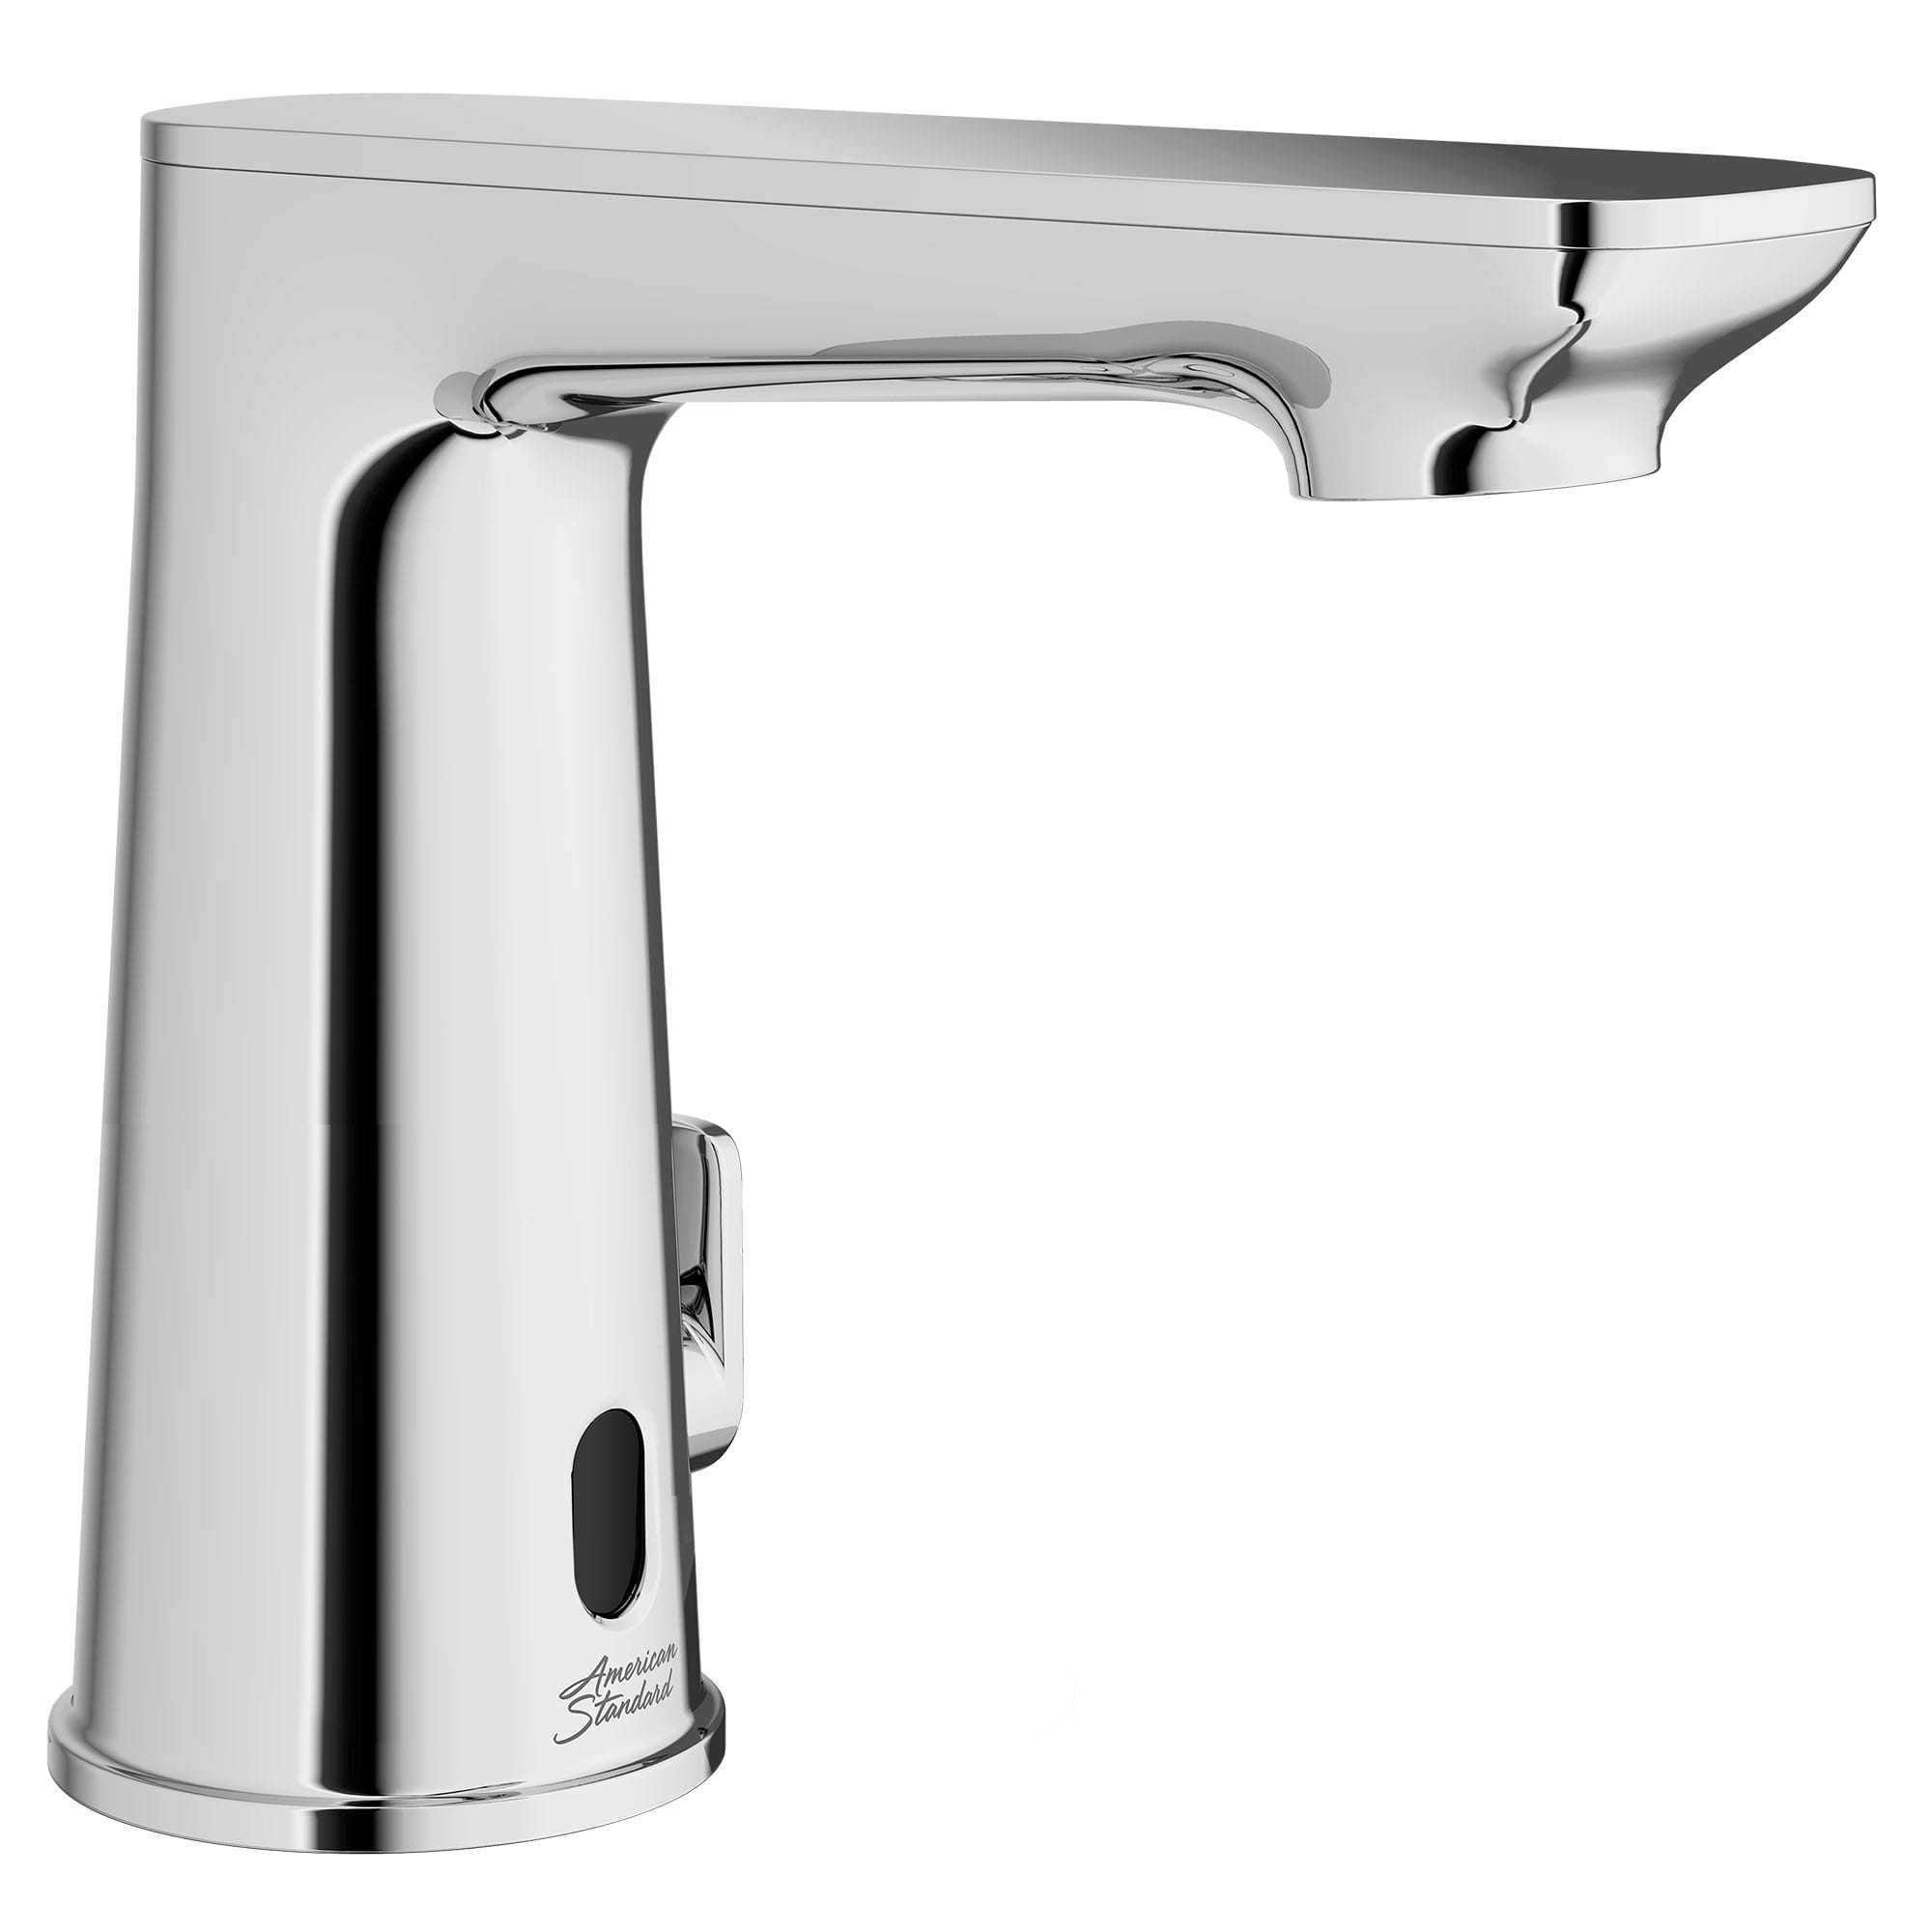 Clean IR™ Touchless Faucet, Battery-Powered with Above-Deck Mixing, 0.5 gpm/1.9 Lpm